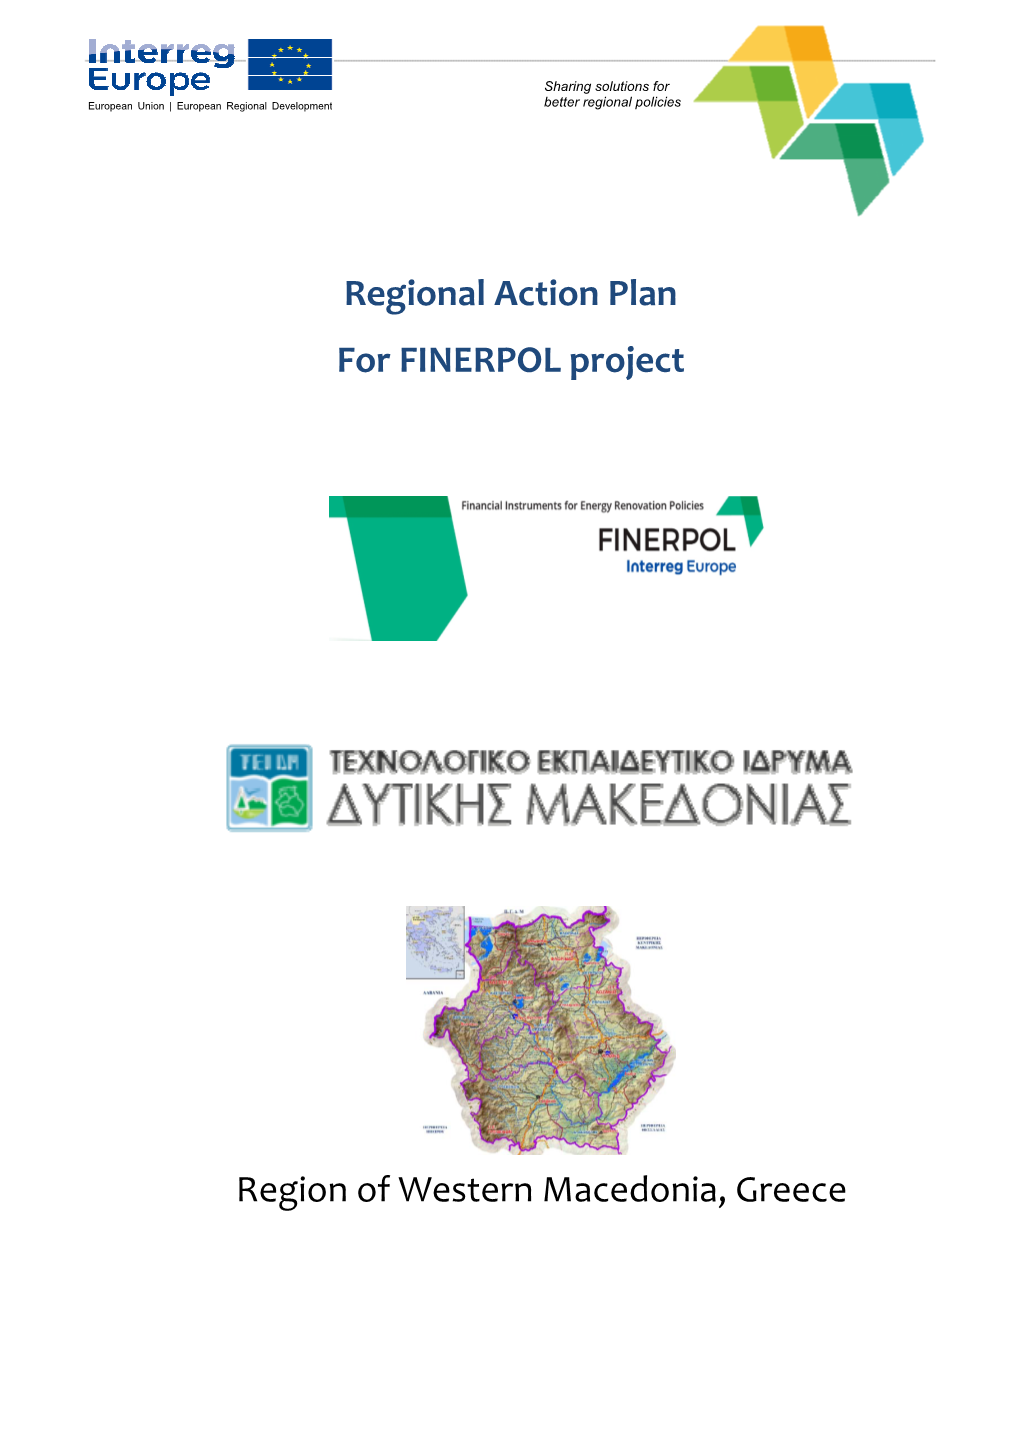 Regional Action Plan for FINERPOL Project Region of Western Macedonia, Greece